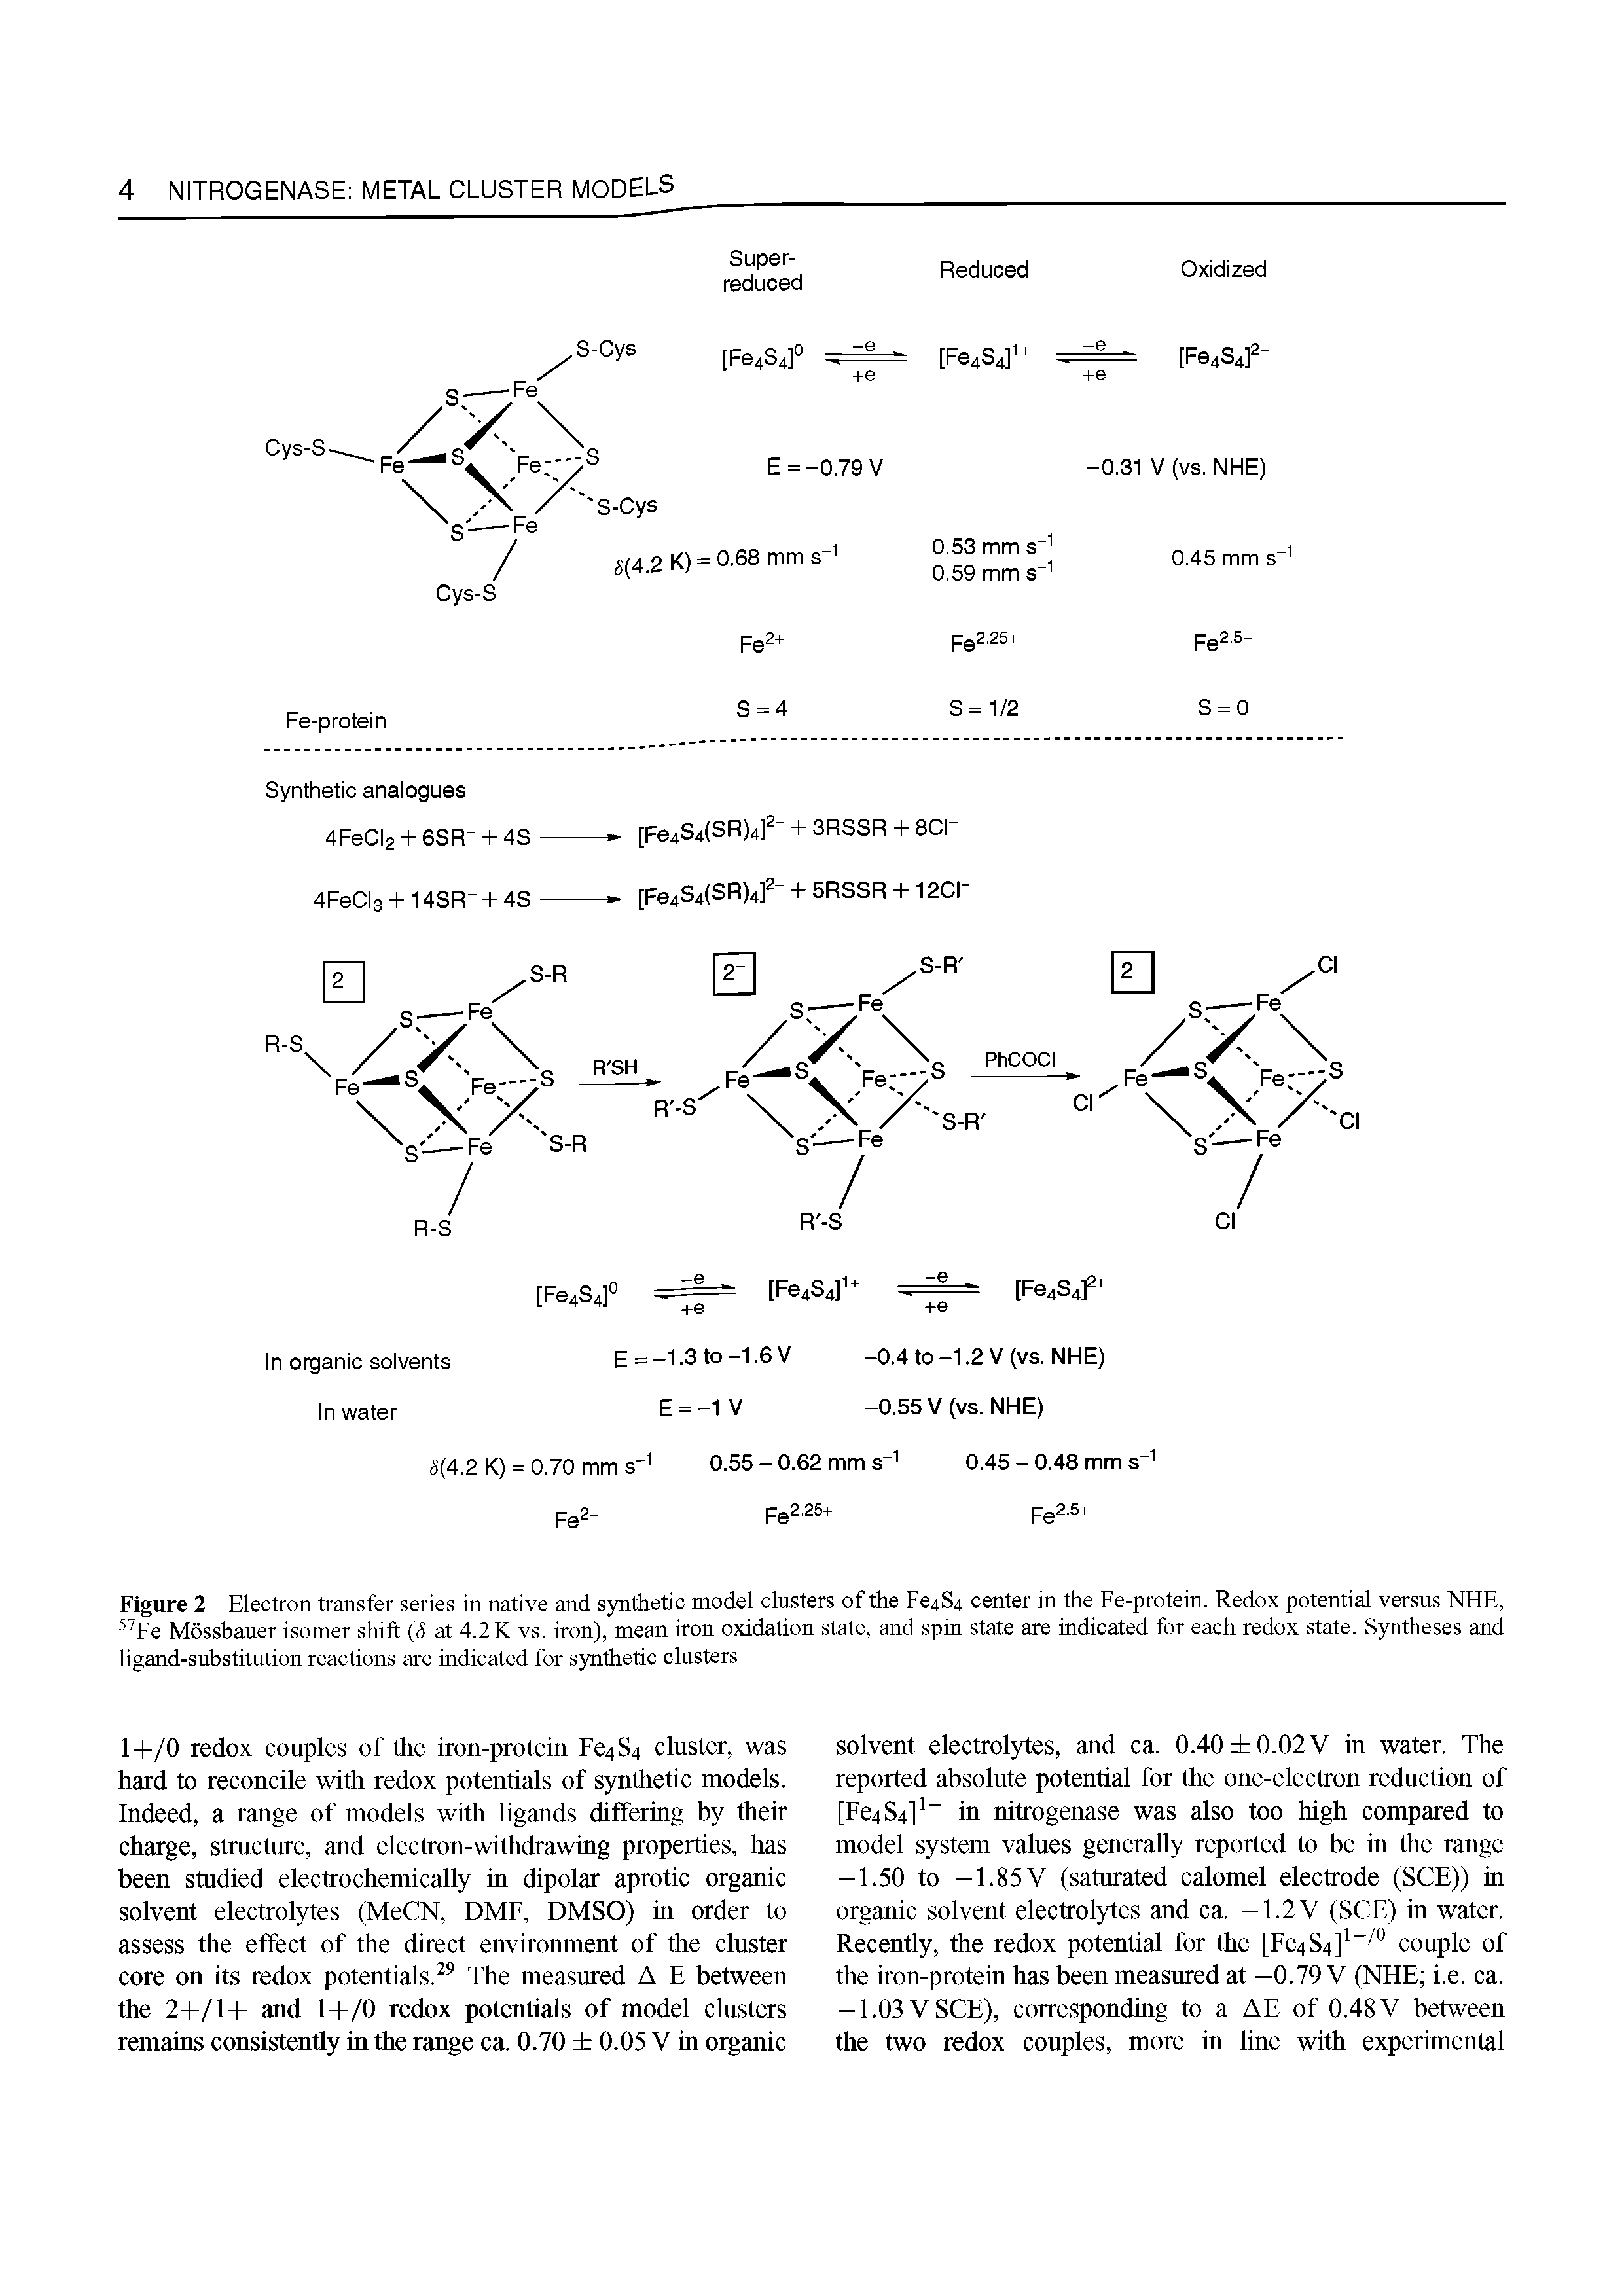 Figure 2 Electron transfer series in native and synthetic model clusters of the Fe4S4 center in the Fe-protein. Redox potential versus NHE, Fe Mossbauer isomer shift (S at 4.2 K vs. iron), mean iron oxidation state, and spin state are indicated for each redox state. Syntheses and ligand-substitution reactions are indicated for synthetic clusters...